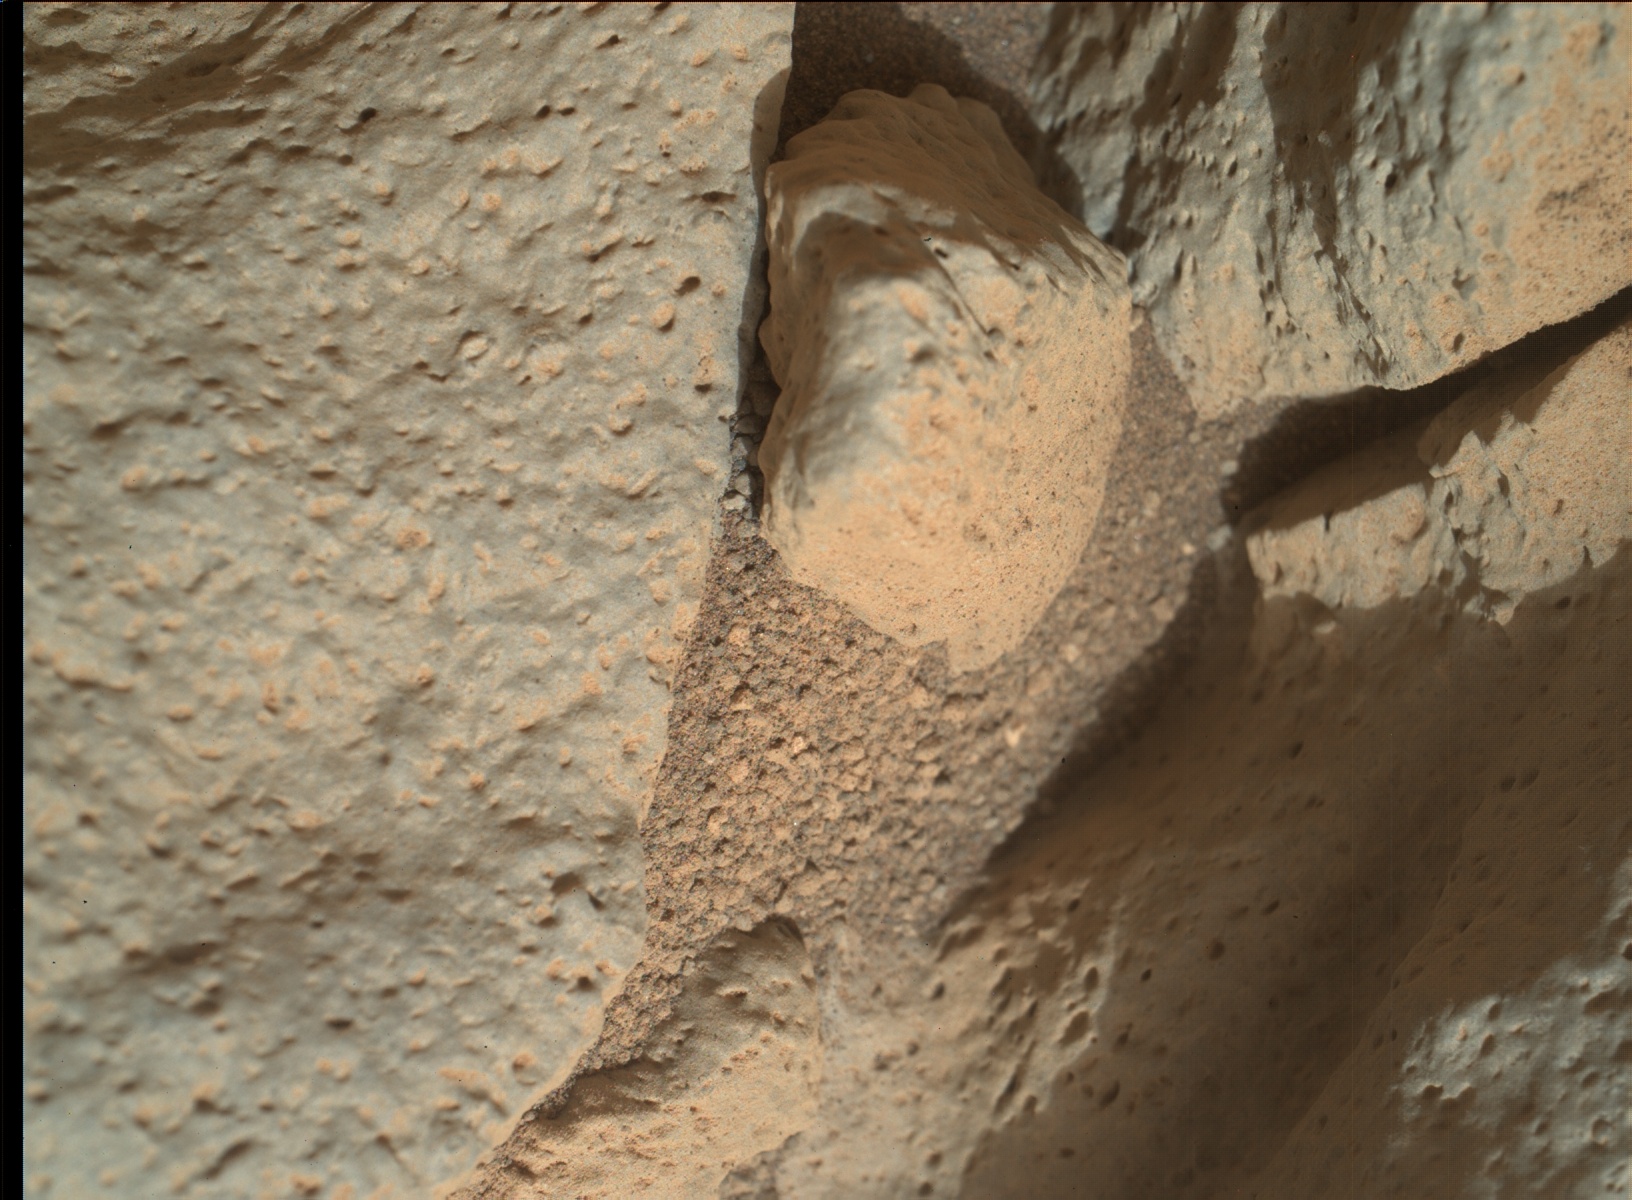 Nasa's Mars rover Curiosity acquired this image using its Mars Hand Lens Imager (MAHLI) on Sol 814